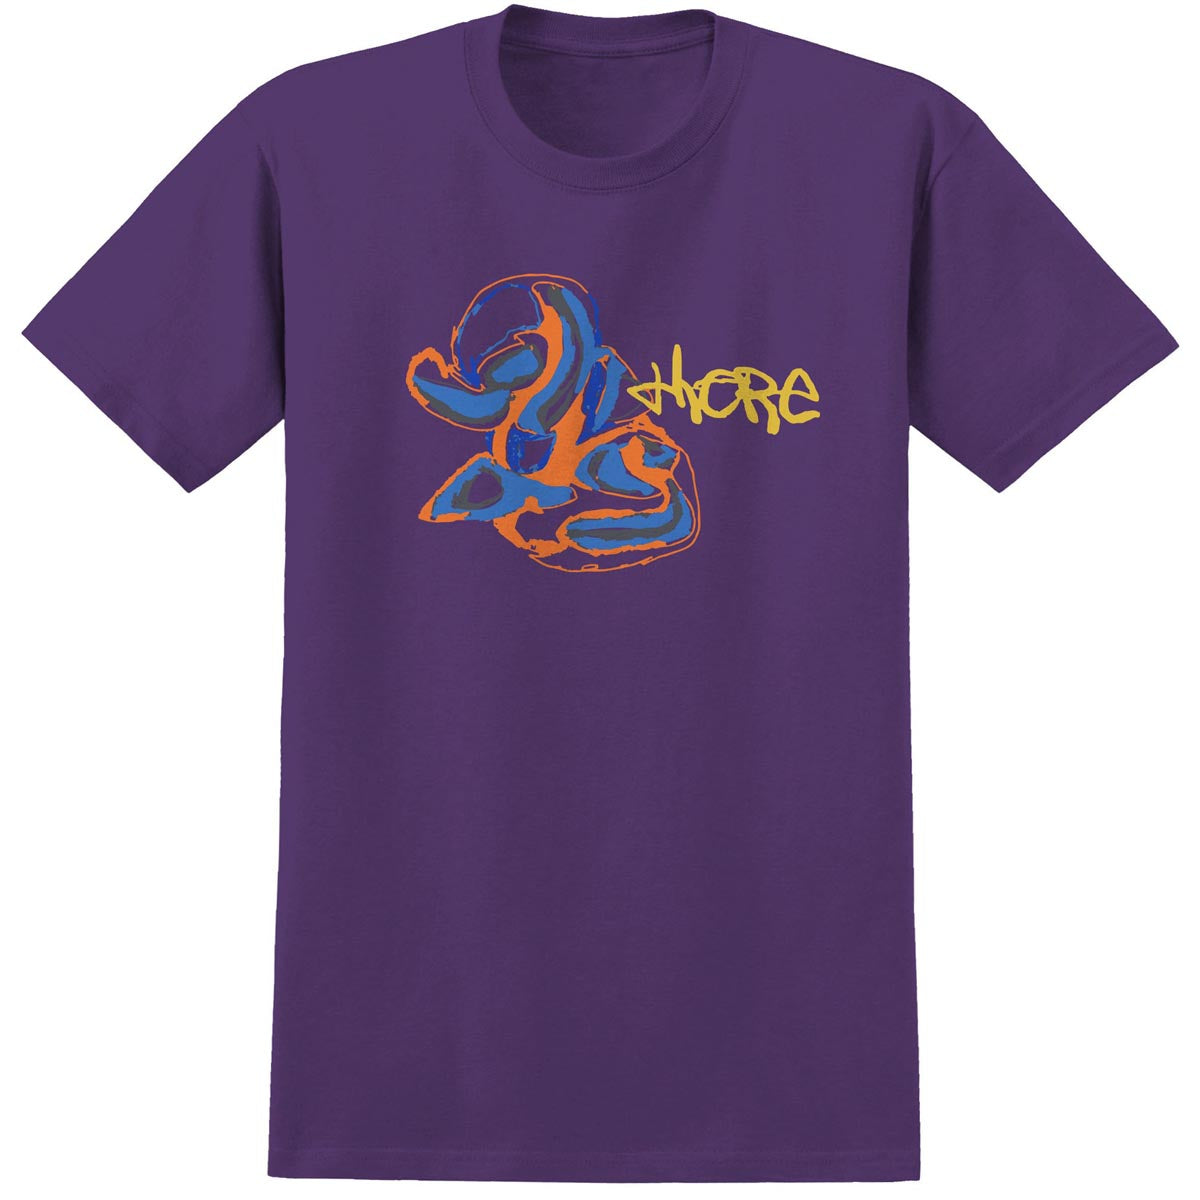 There Ninety Four T-Shirt - Purple image 1